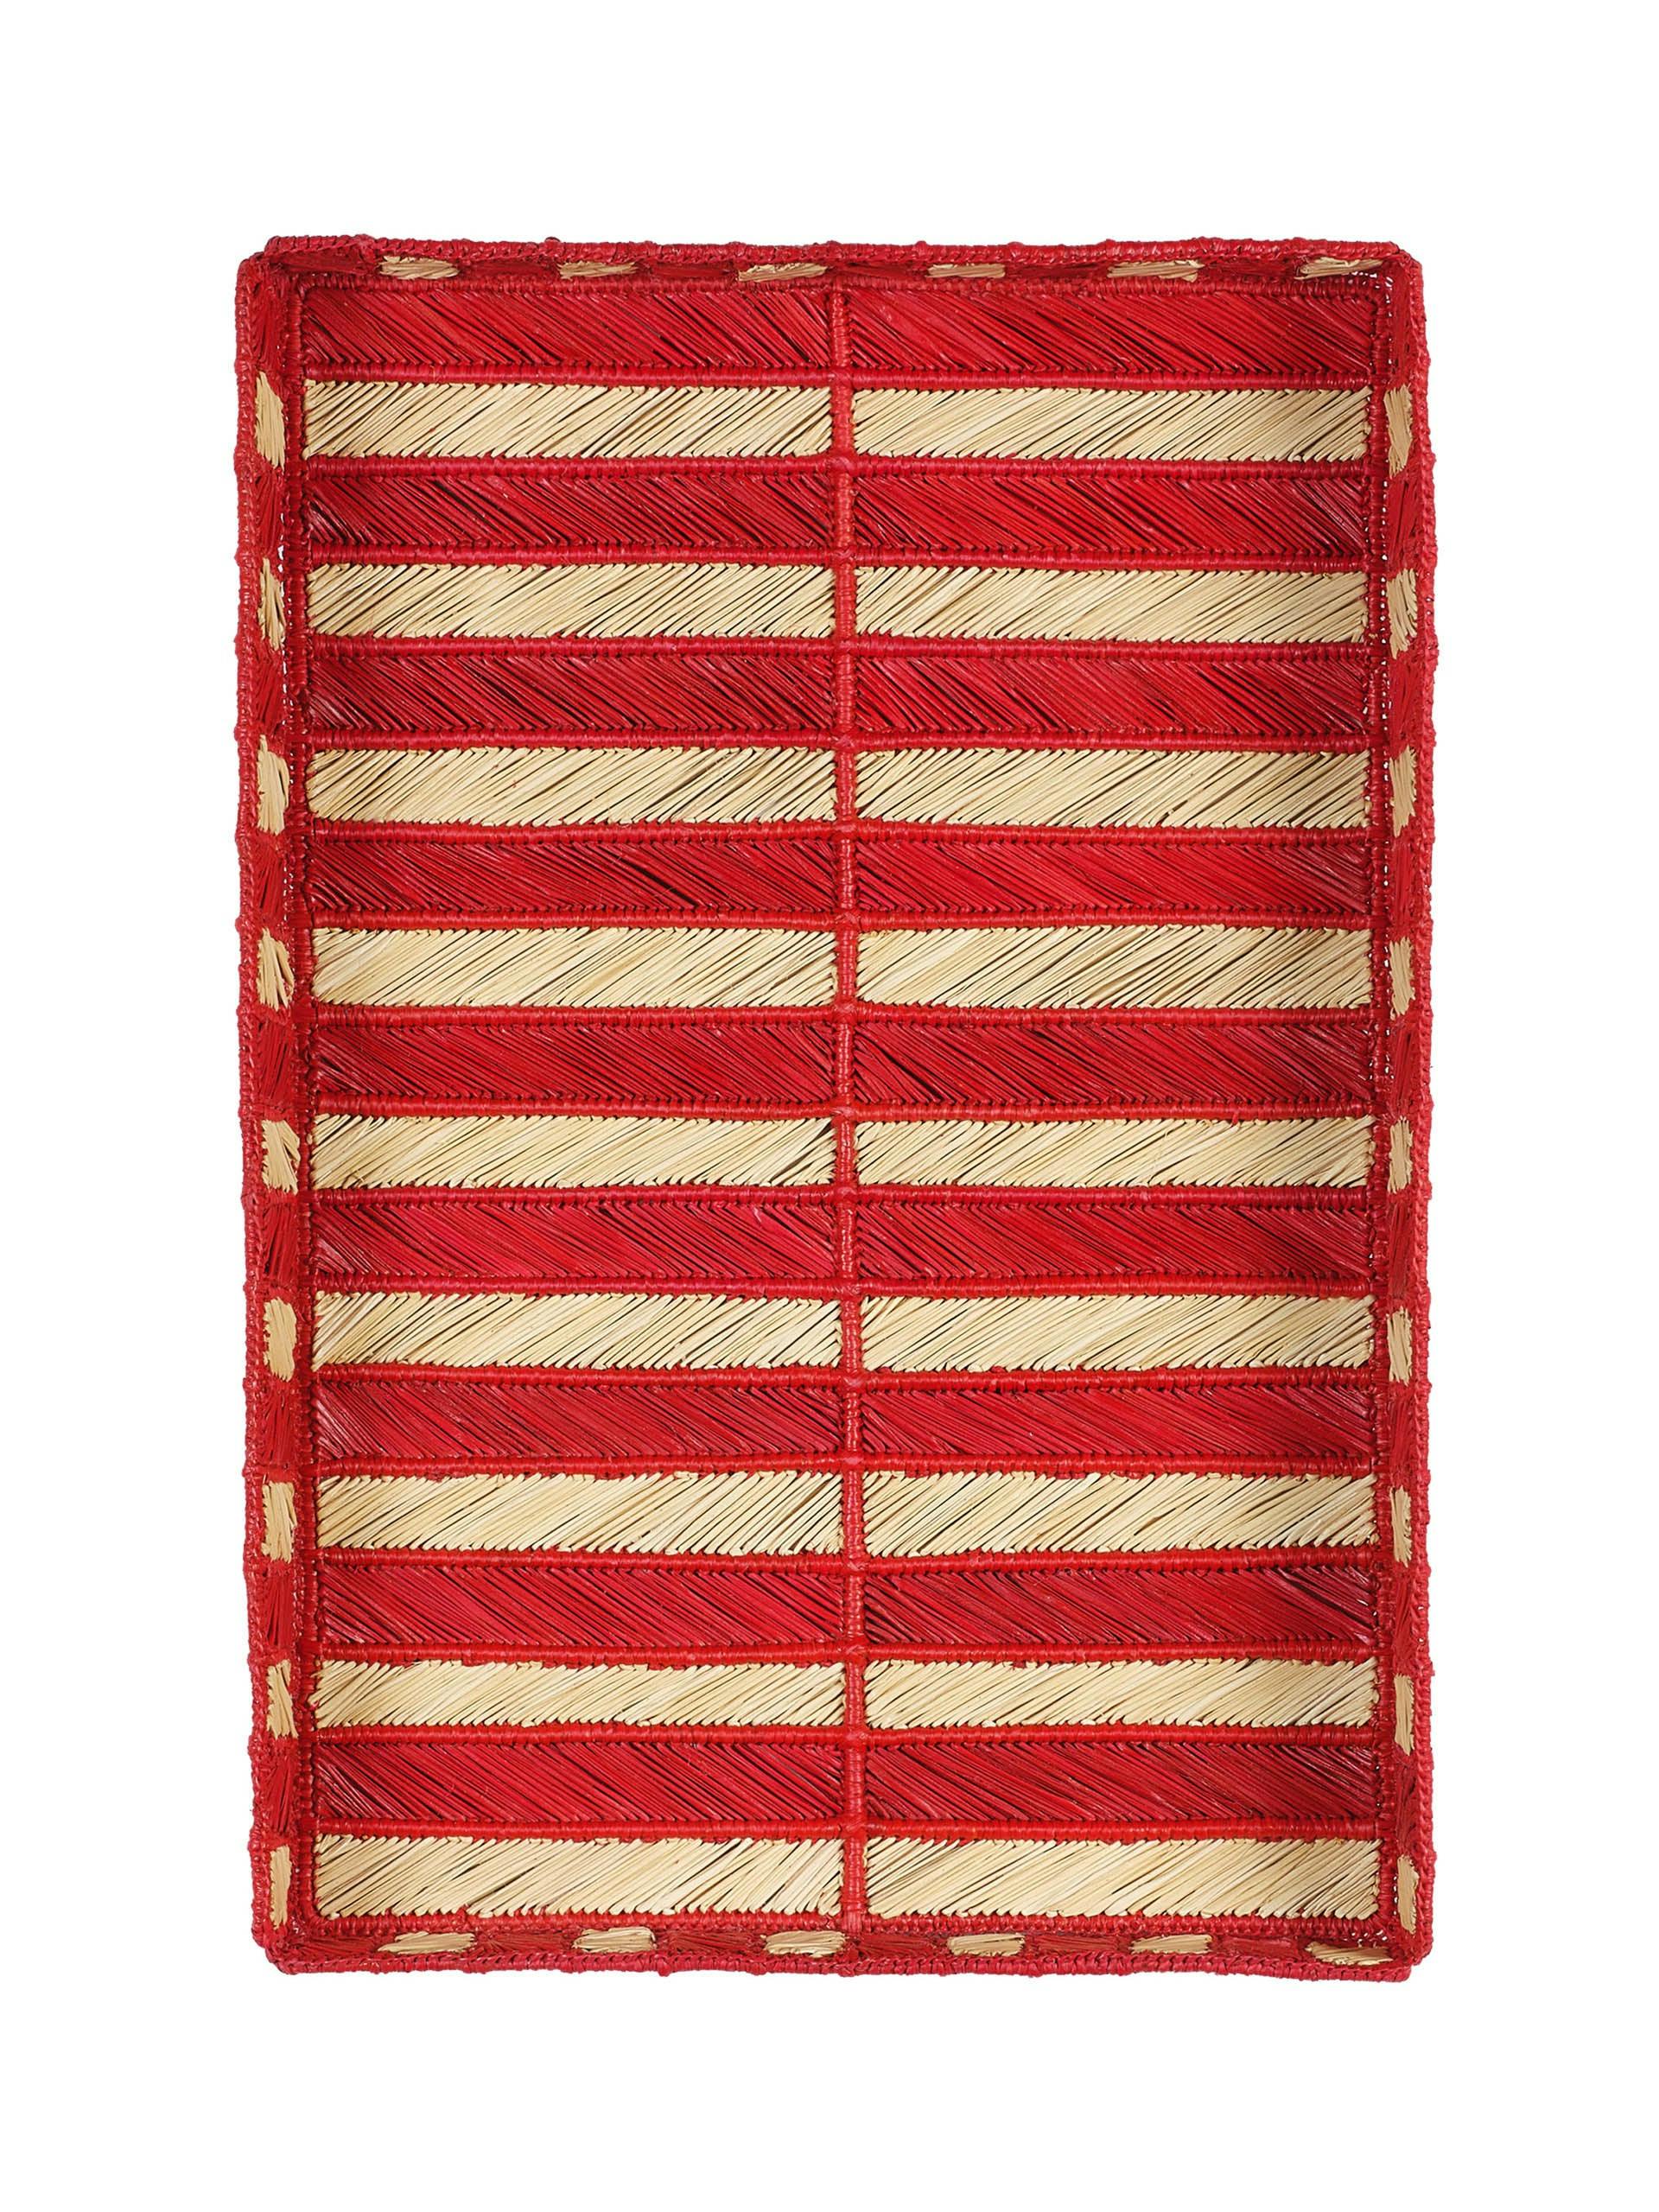 Hand-woven striped tray